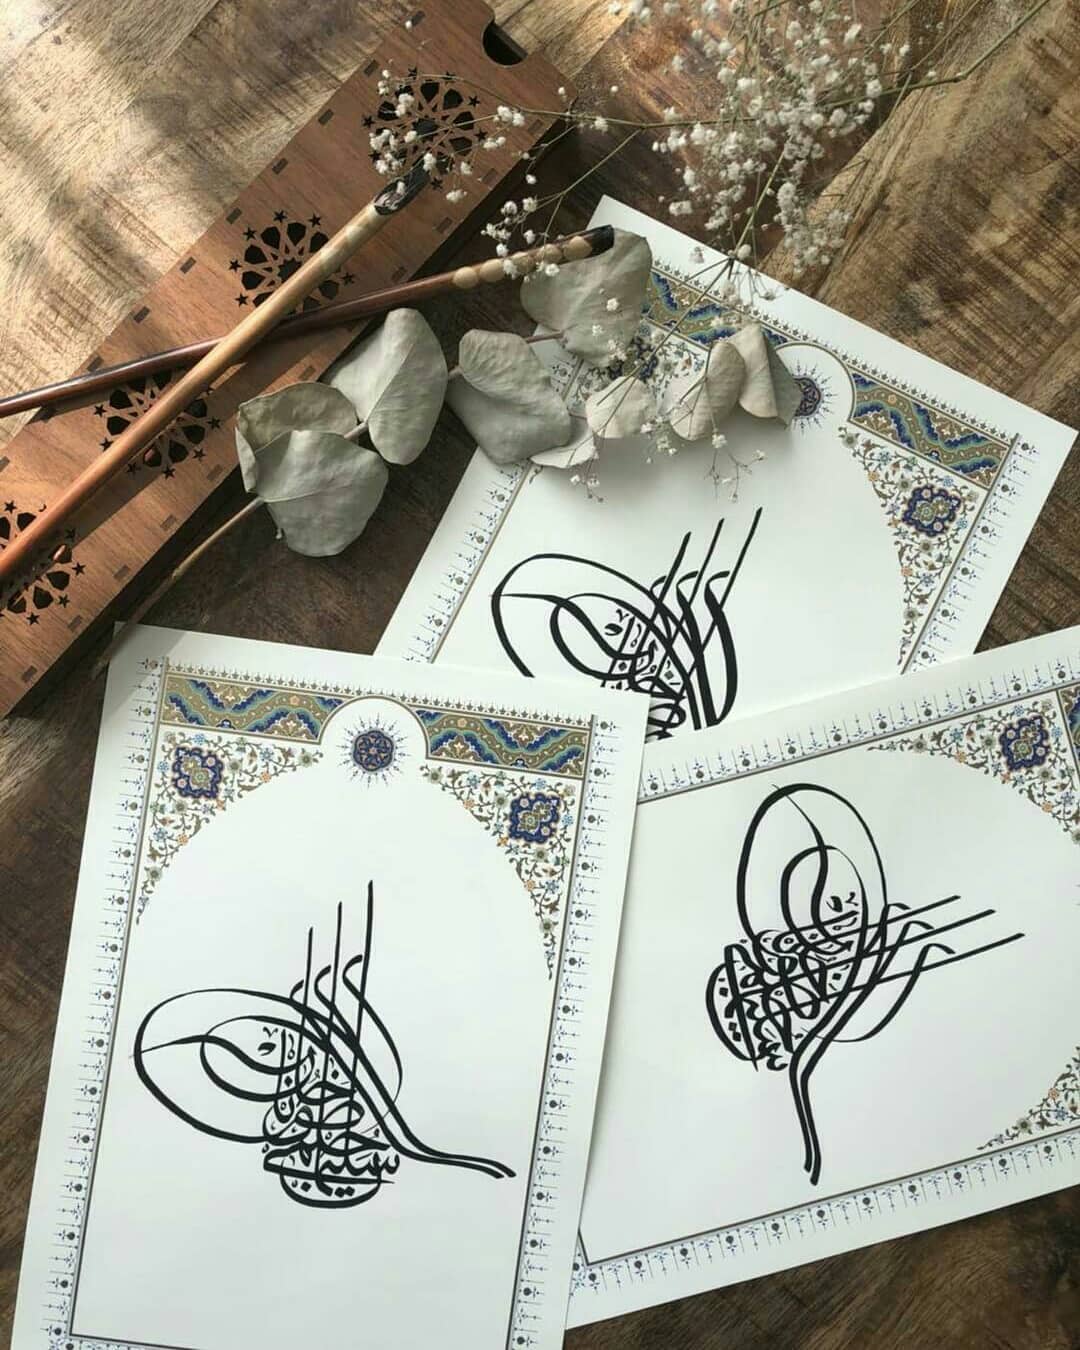 @beautifulliness using that Ottoman signature or Tughra beautifully for a name. …